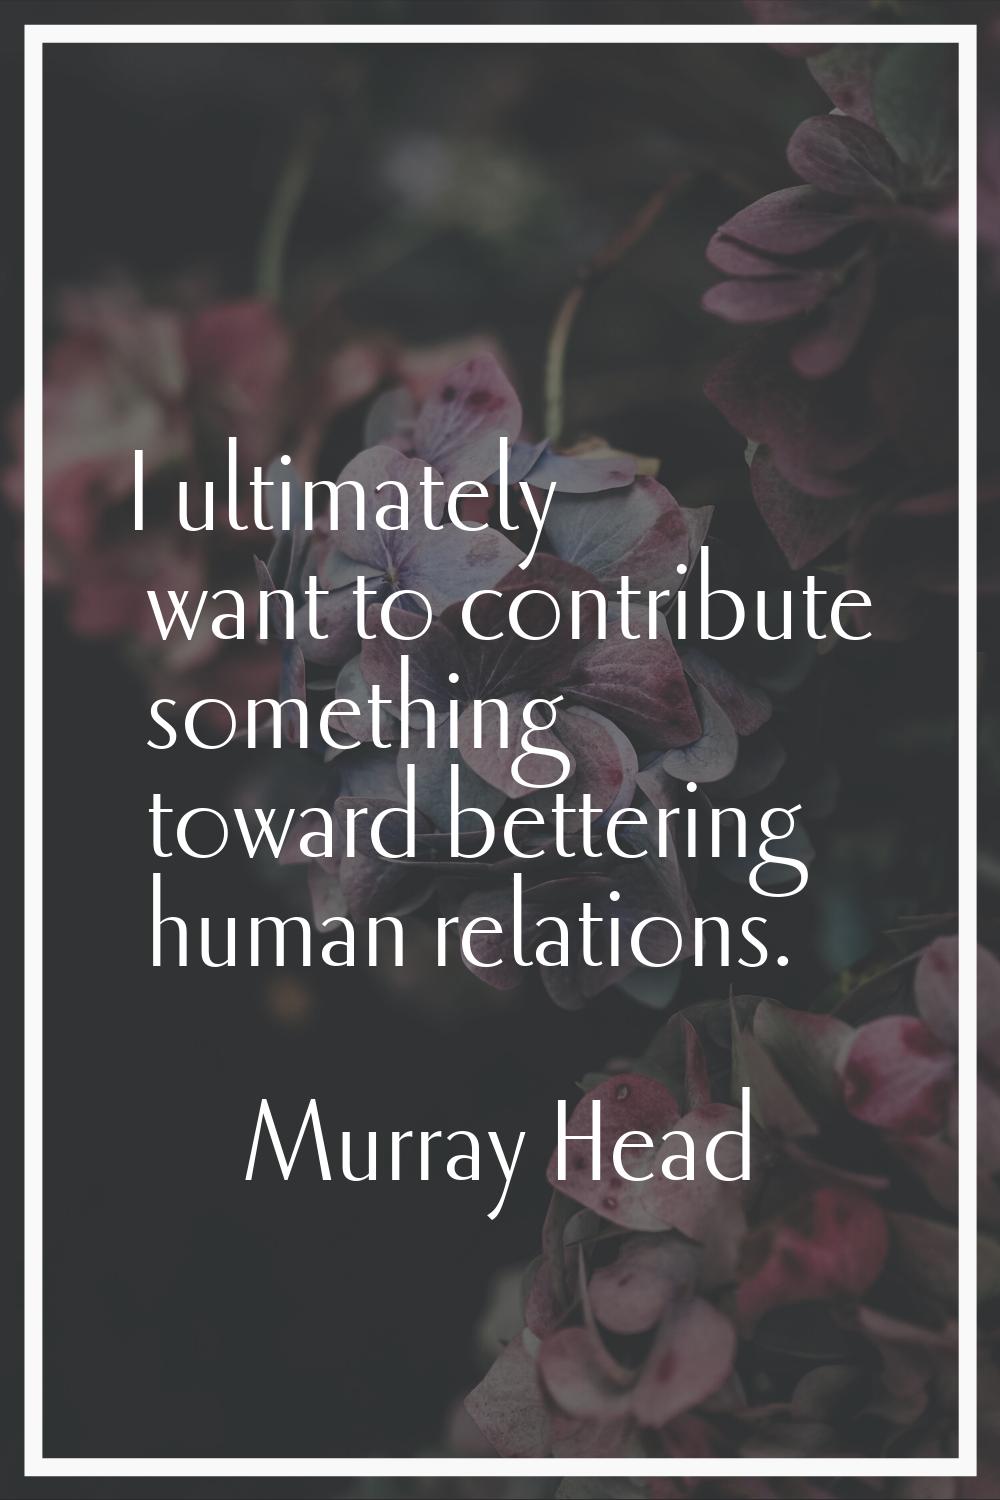 I ultimately want to contribute something toward bettering human relations.